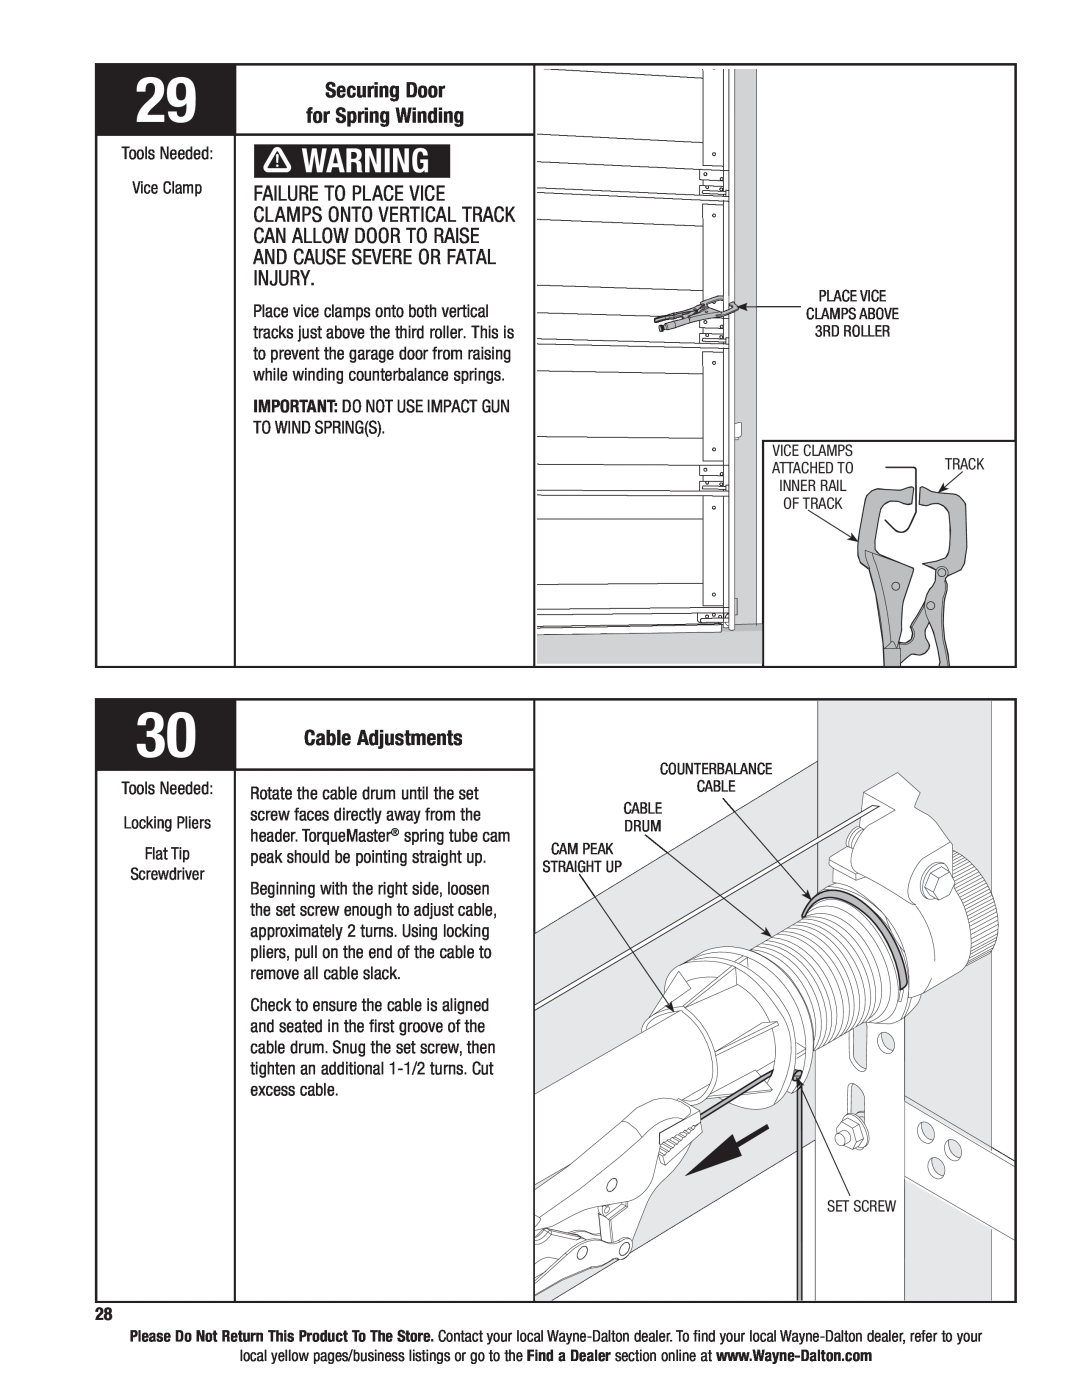 Wayne-Dalton 9600 installation instructions Securing Door for Spring Winding, Cable Adjustments, Tools Needed Vice Clamp 